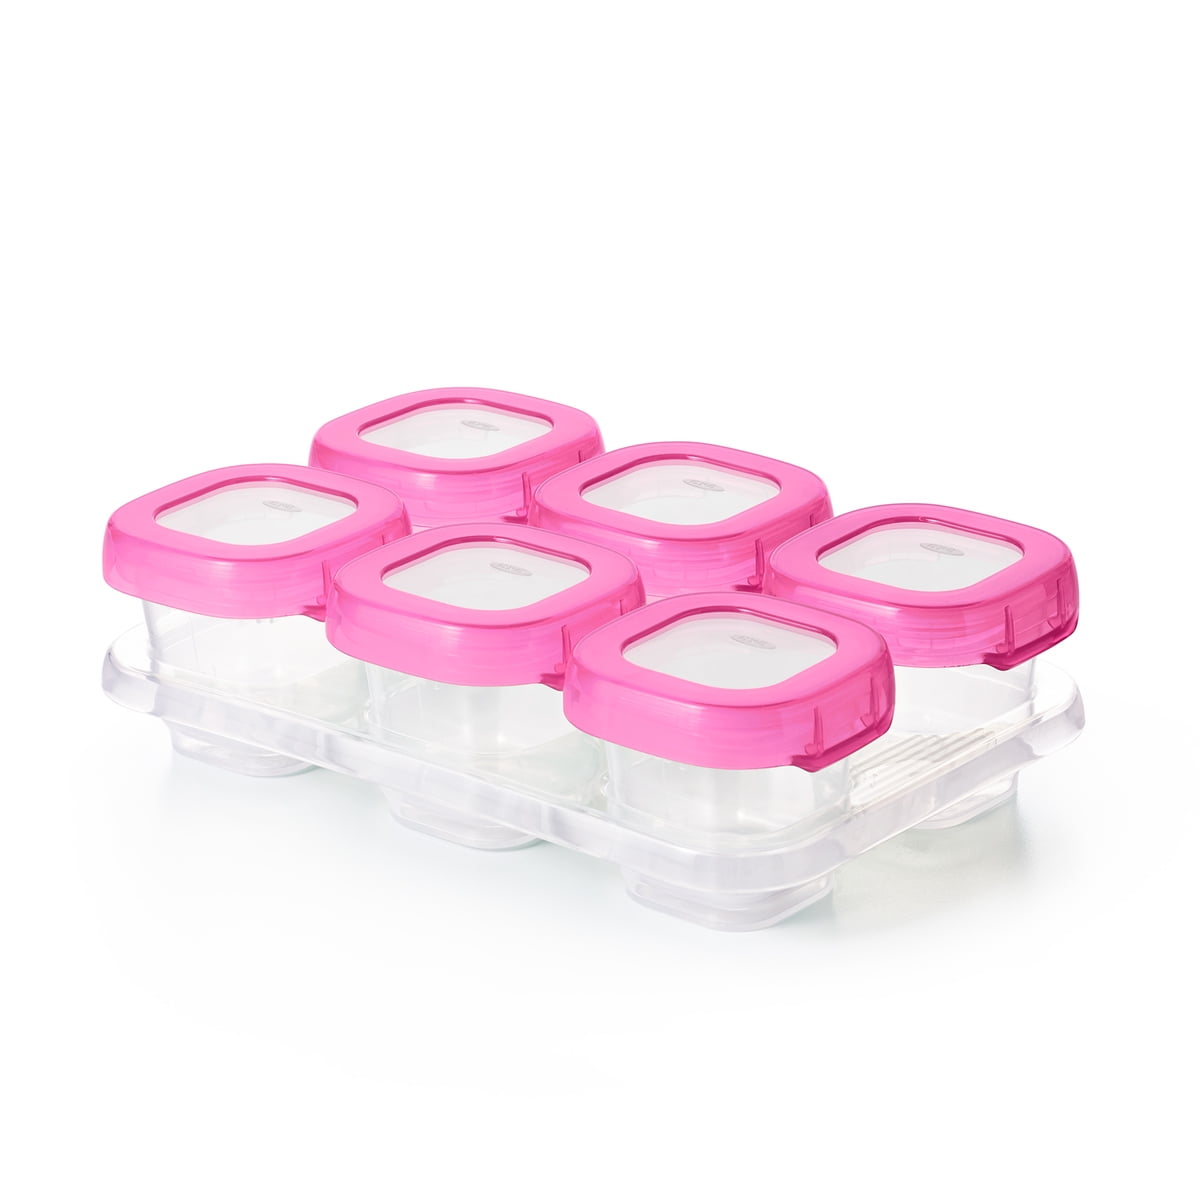 OXO's Prep & Go Containers for Each Day's Adventure 